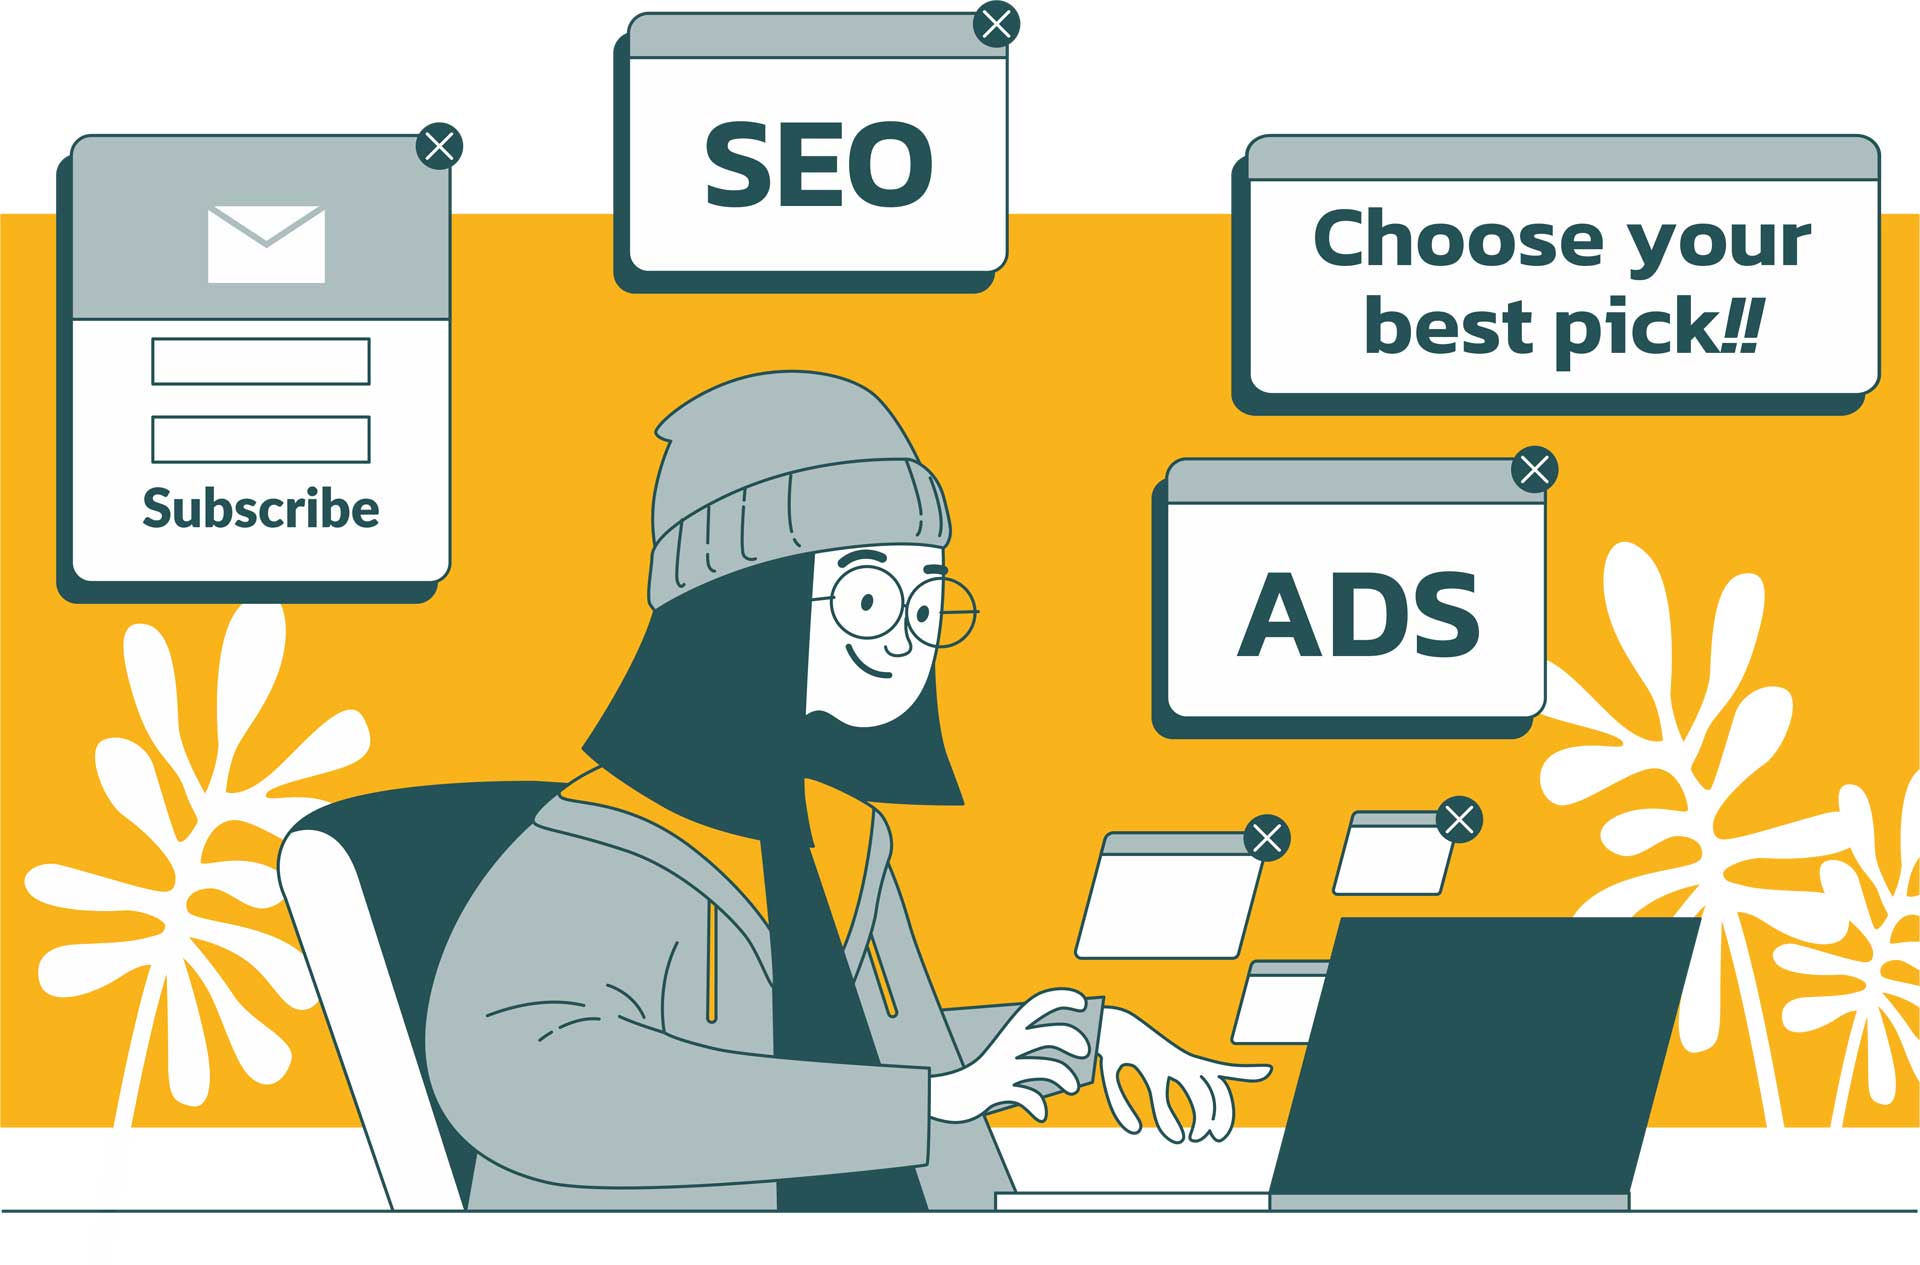 Choose between SEO and Ads